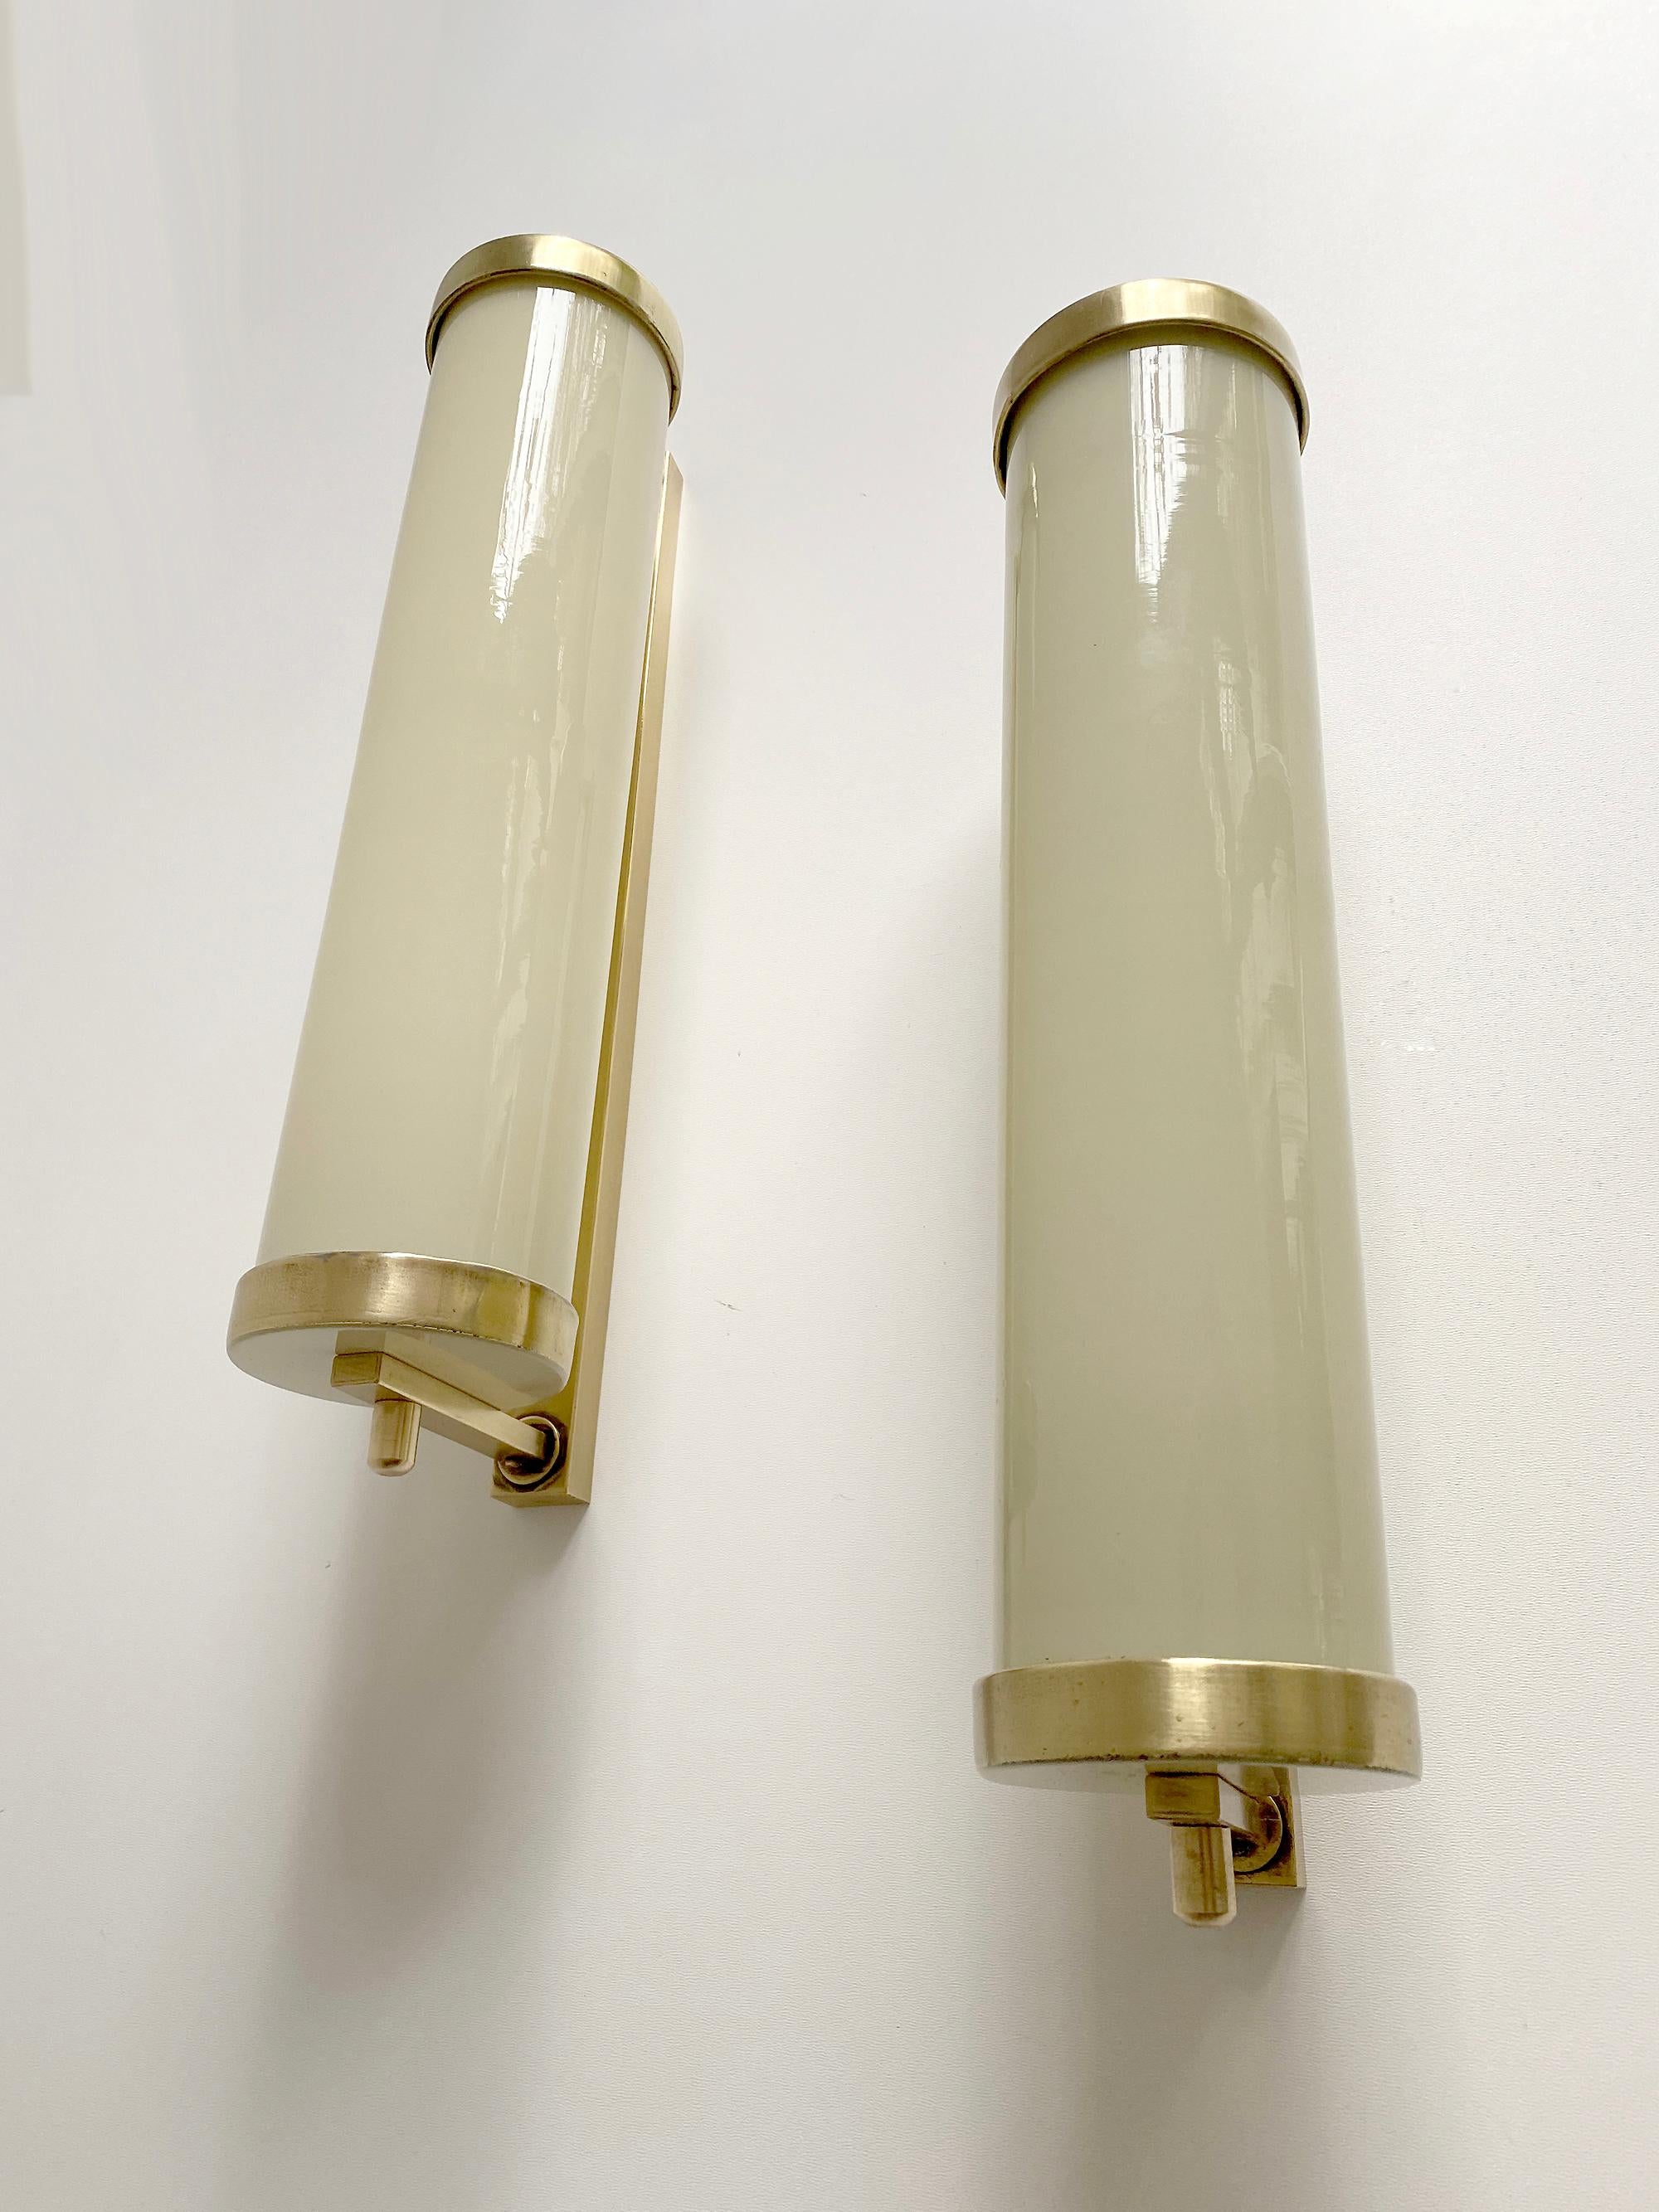 Pair of Large 1930s Art Deco Bauhaus Sconces, Brass and Glass For Sale 7